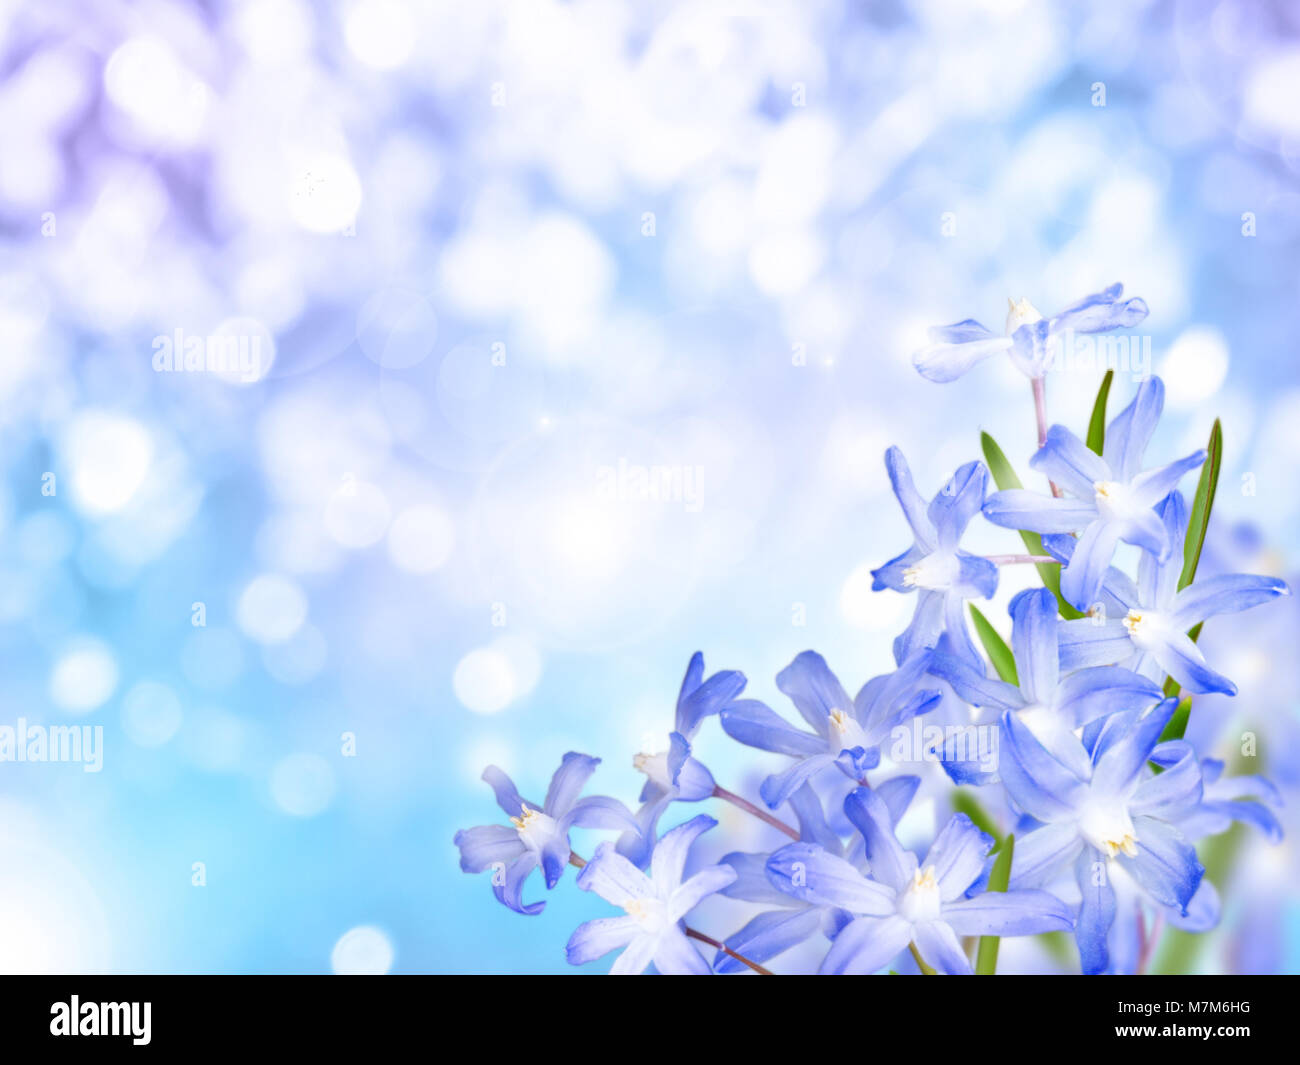 Glory of the show flowers bouquet in the corner ob blue turquoise blurred background. Blue chionodoxa early spring bloom. Stock Photo